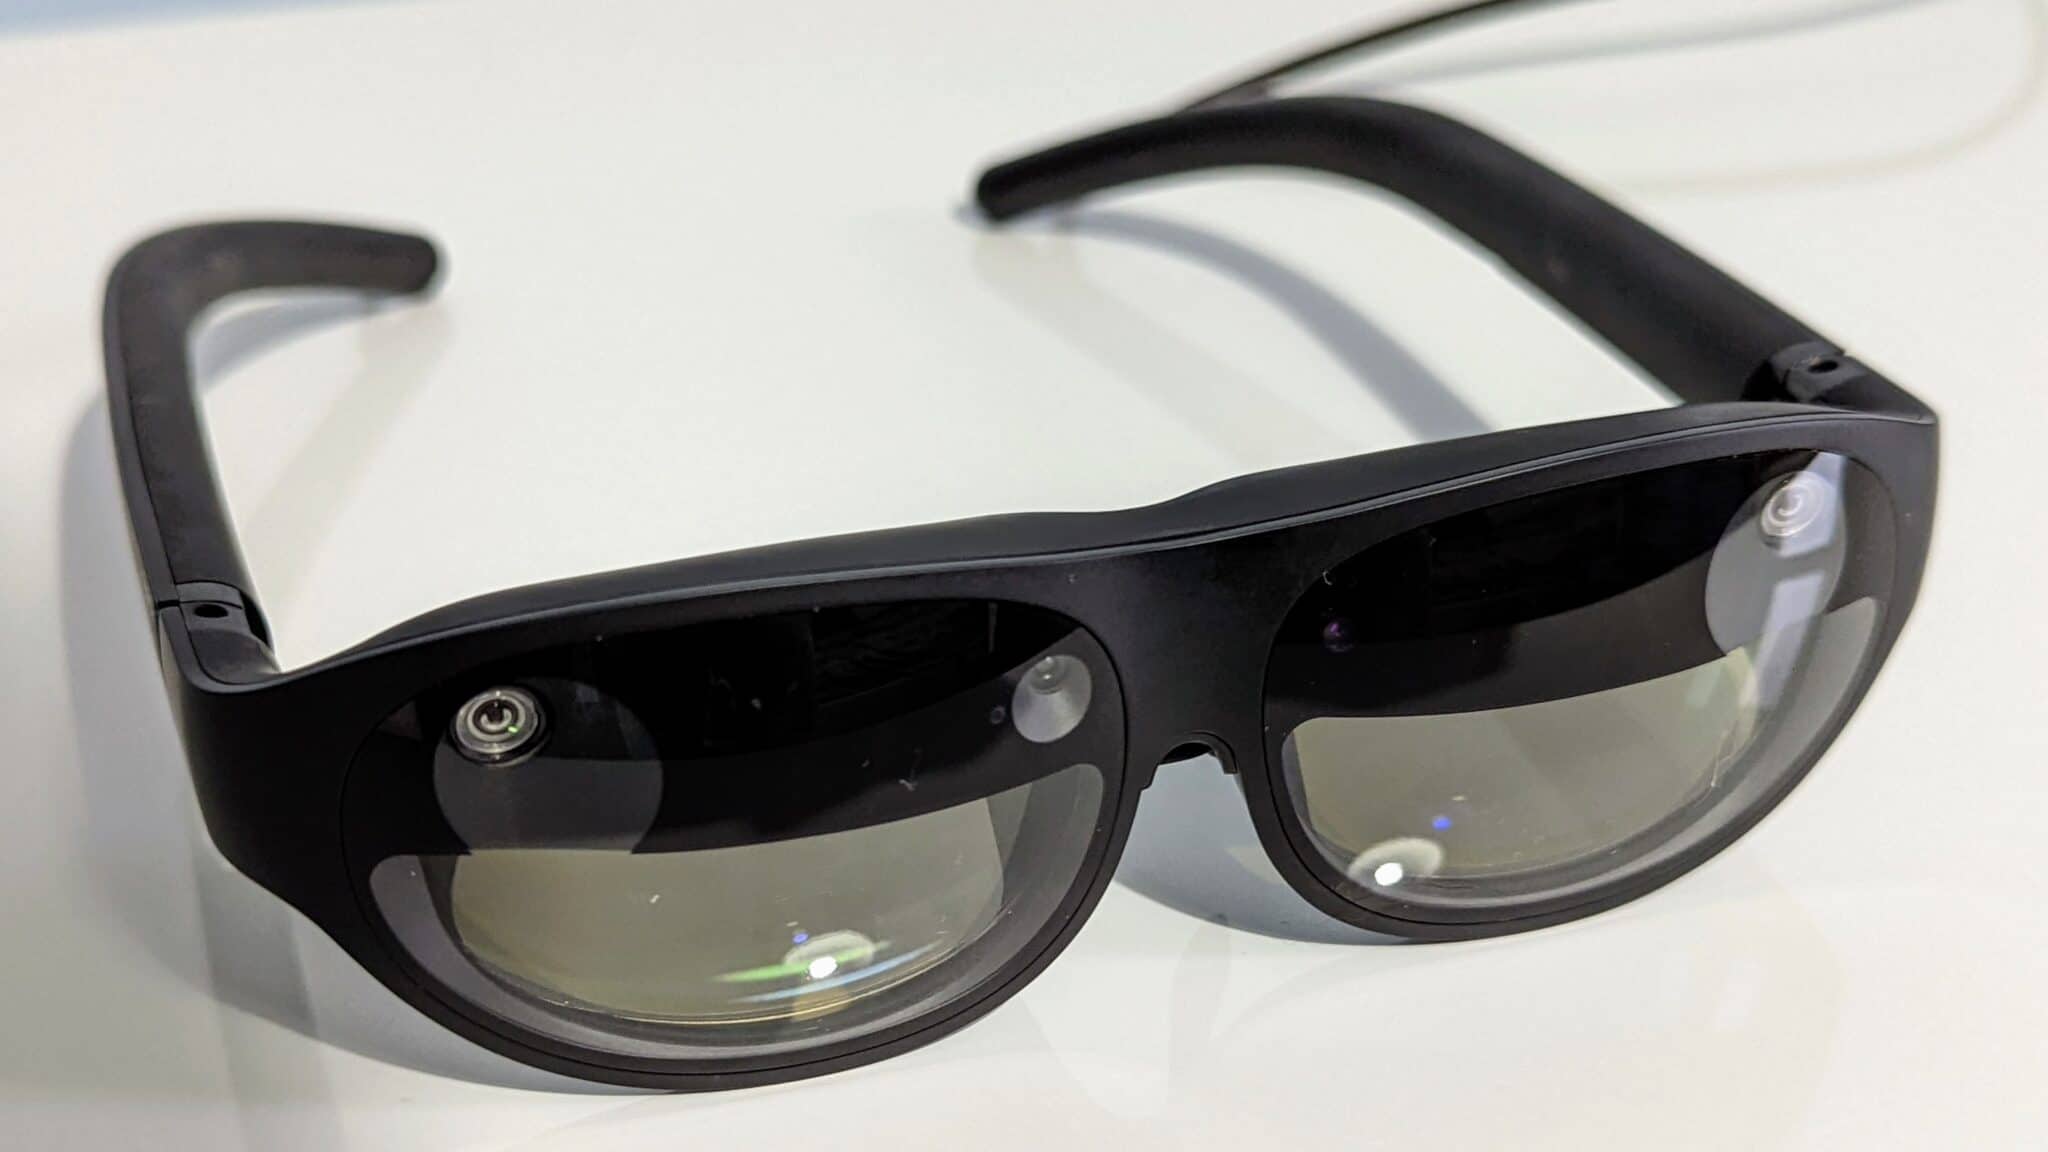 XREAL Air 2 AR Glasses Review: A TV in Your Pocket - Guiding Tech